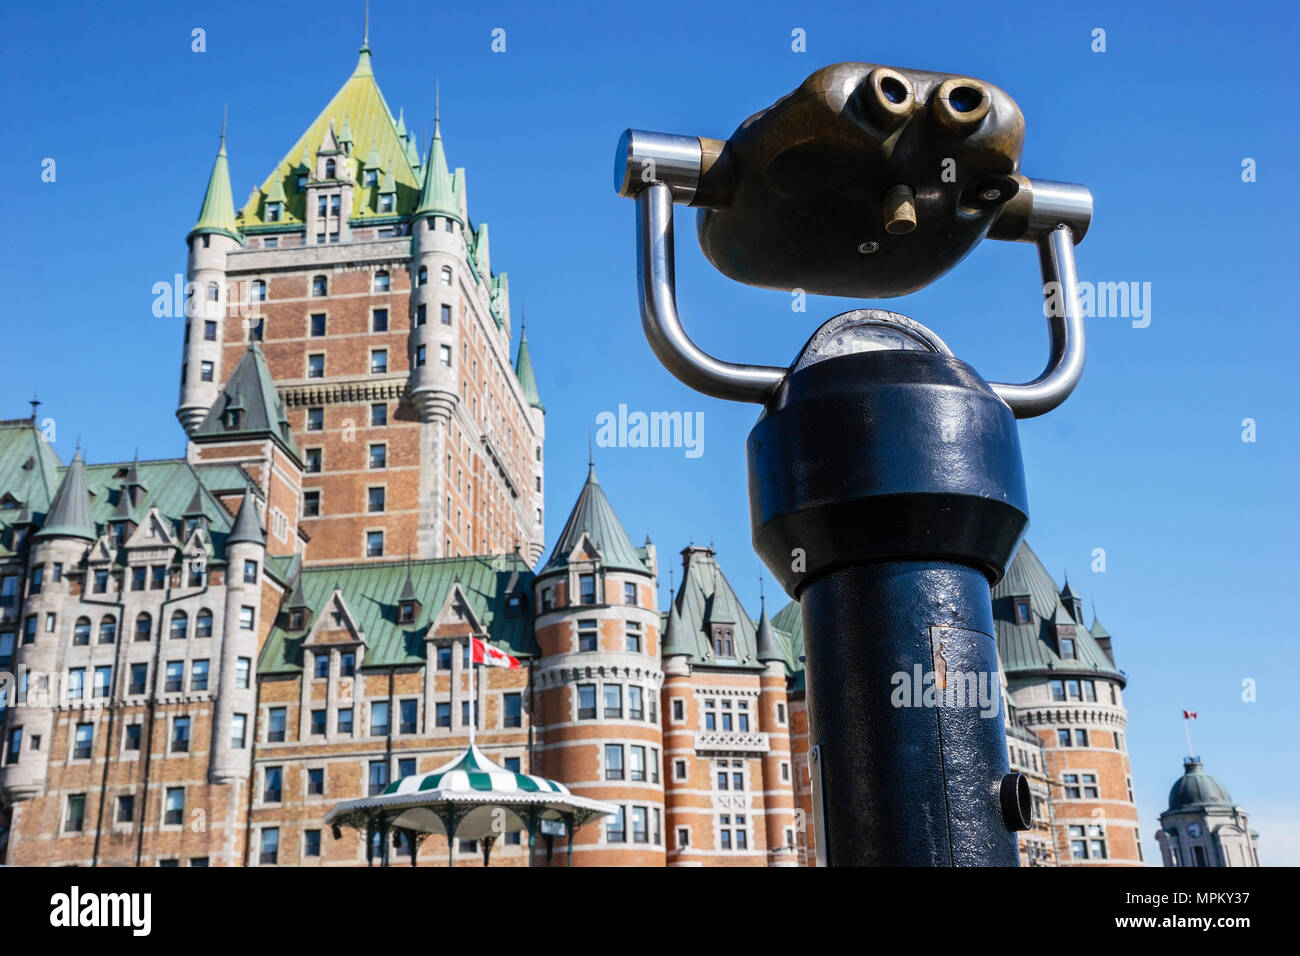 Quebec Canada,Upper Town,Place Terrasse Dufferin,Fairmont Le Chateau Frontenac,hotel,telescopic viewer,Canada070710010 Stock Photo